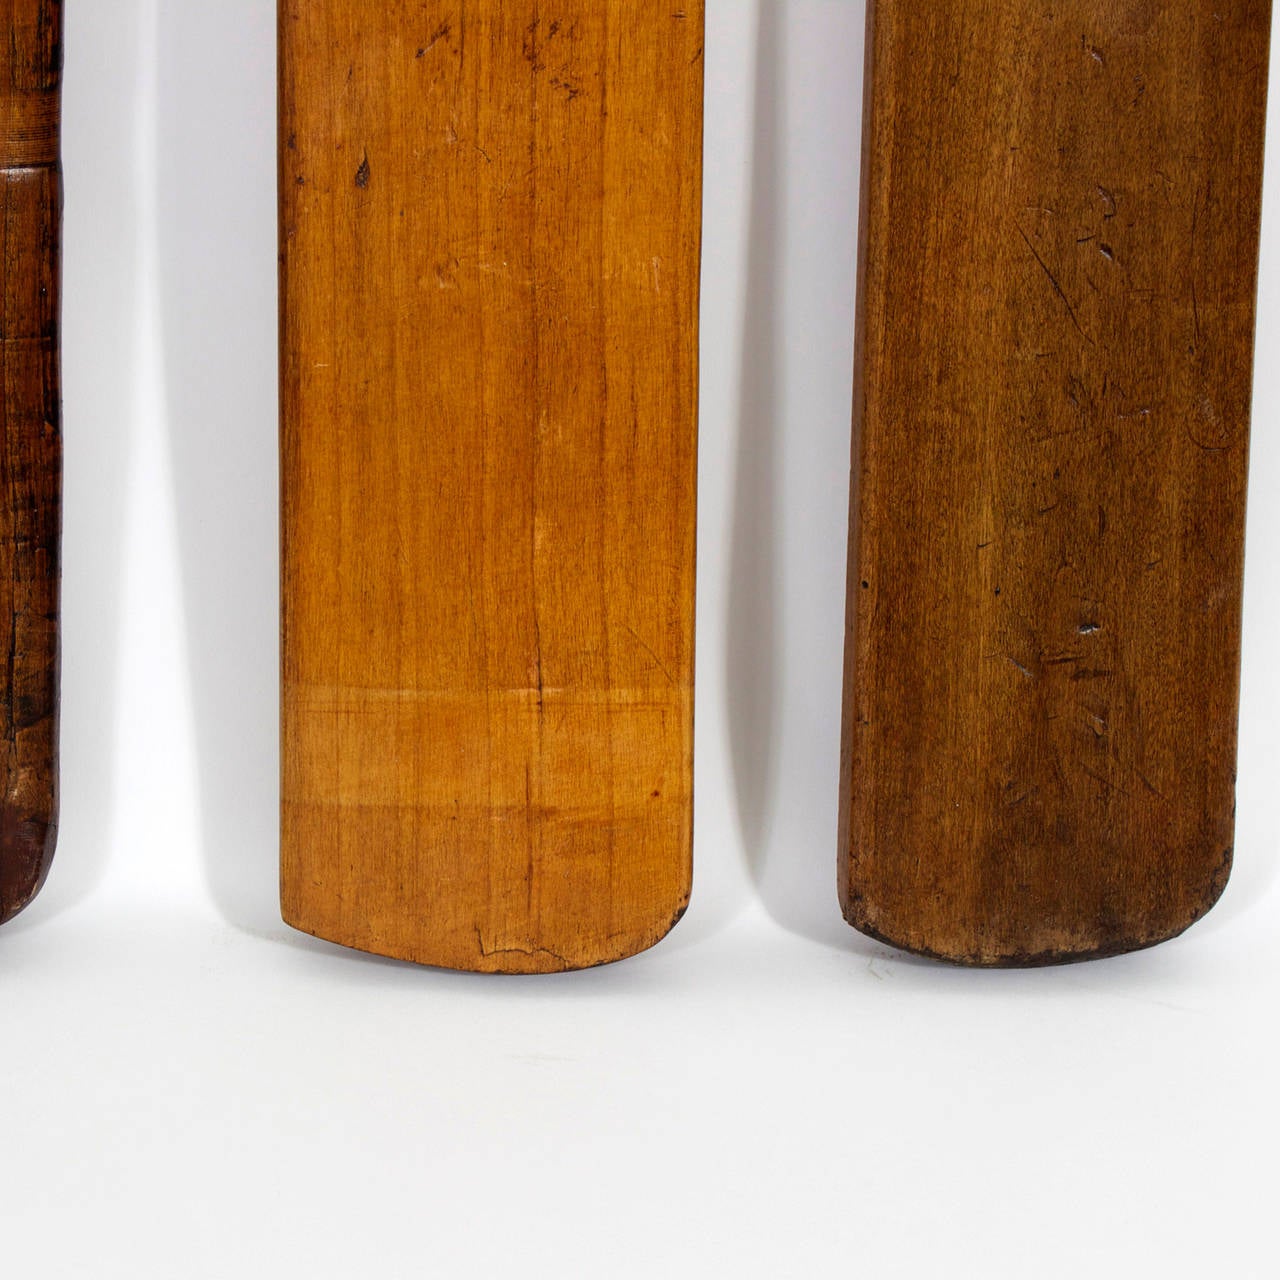 Collection of Fvie Cricket Bats, Great Color and Patina 3